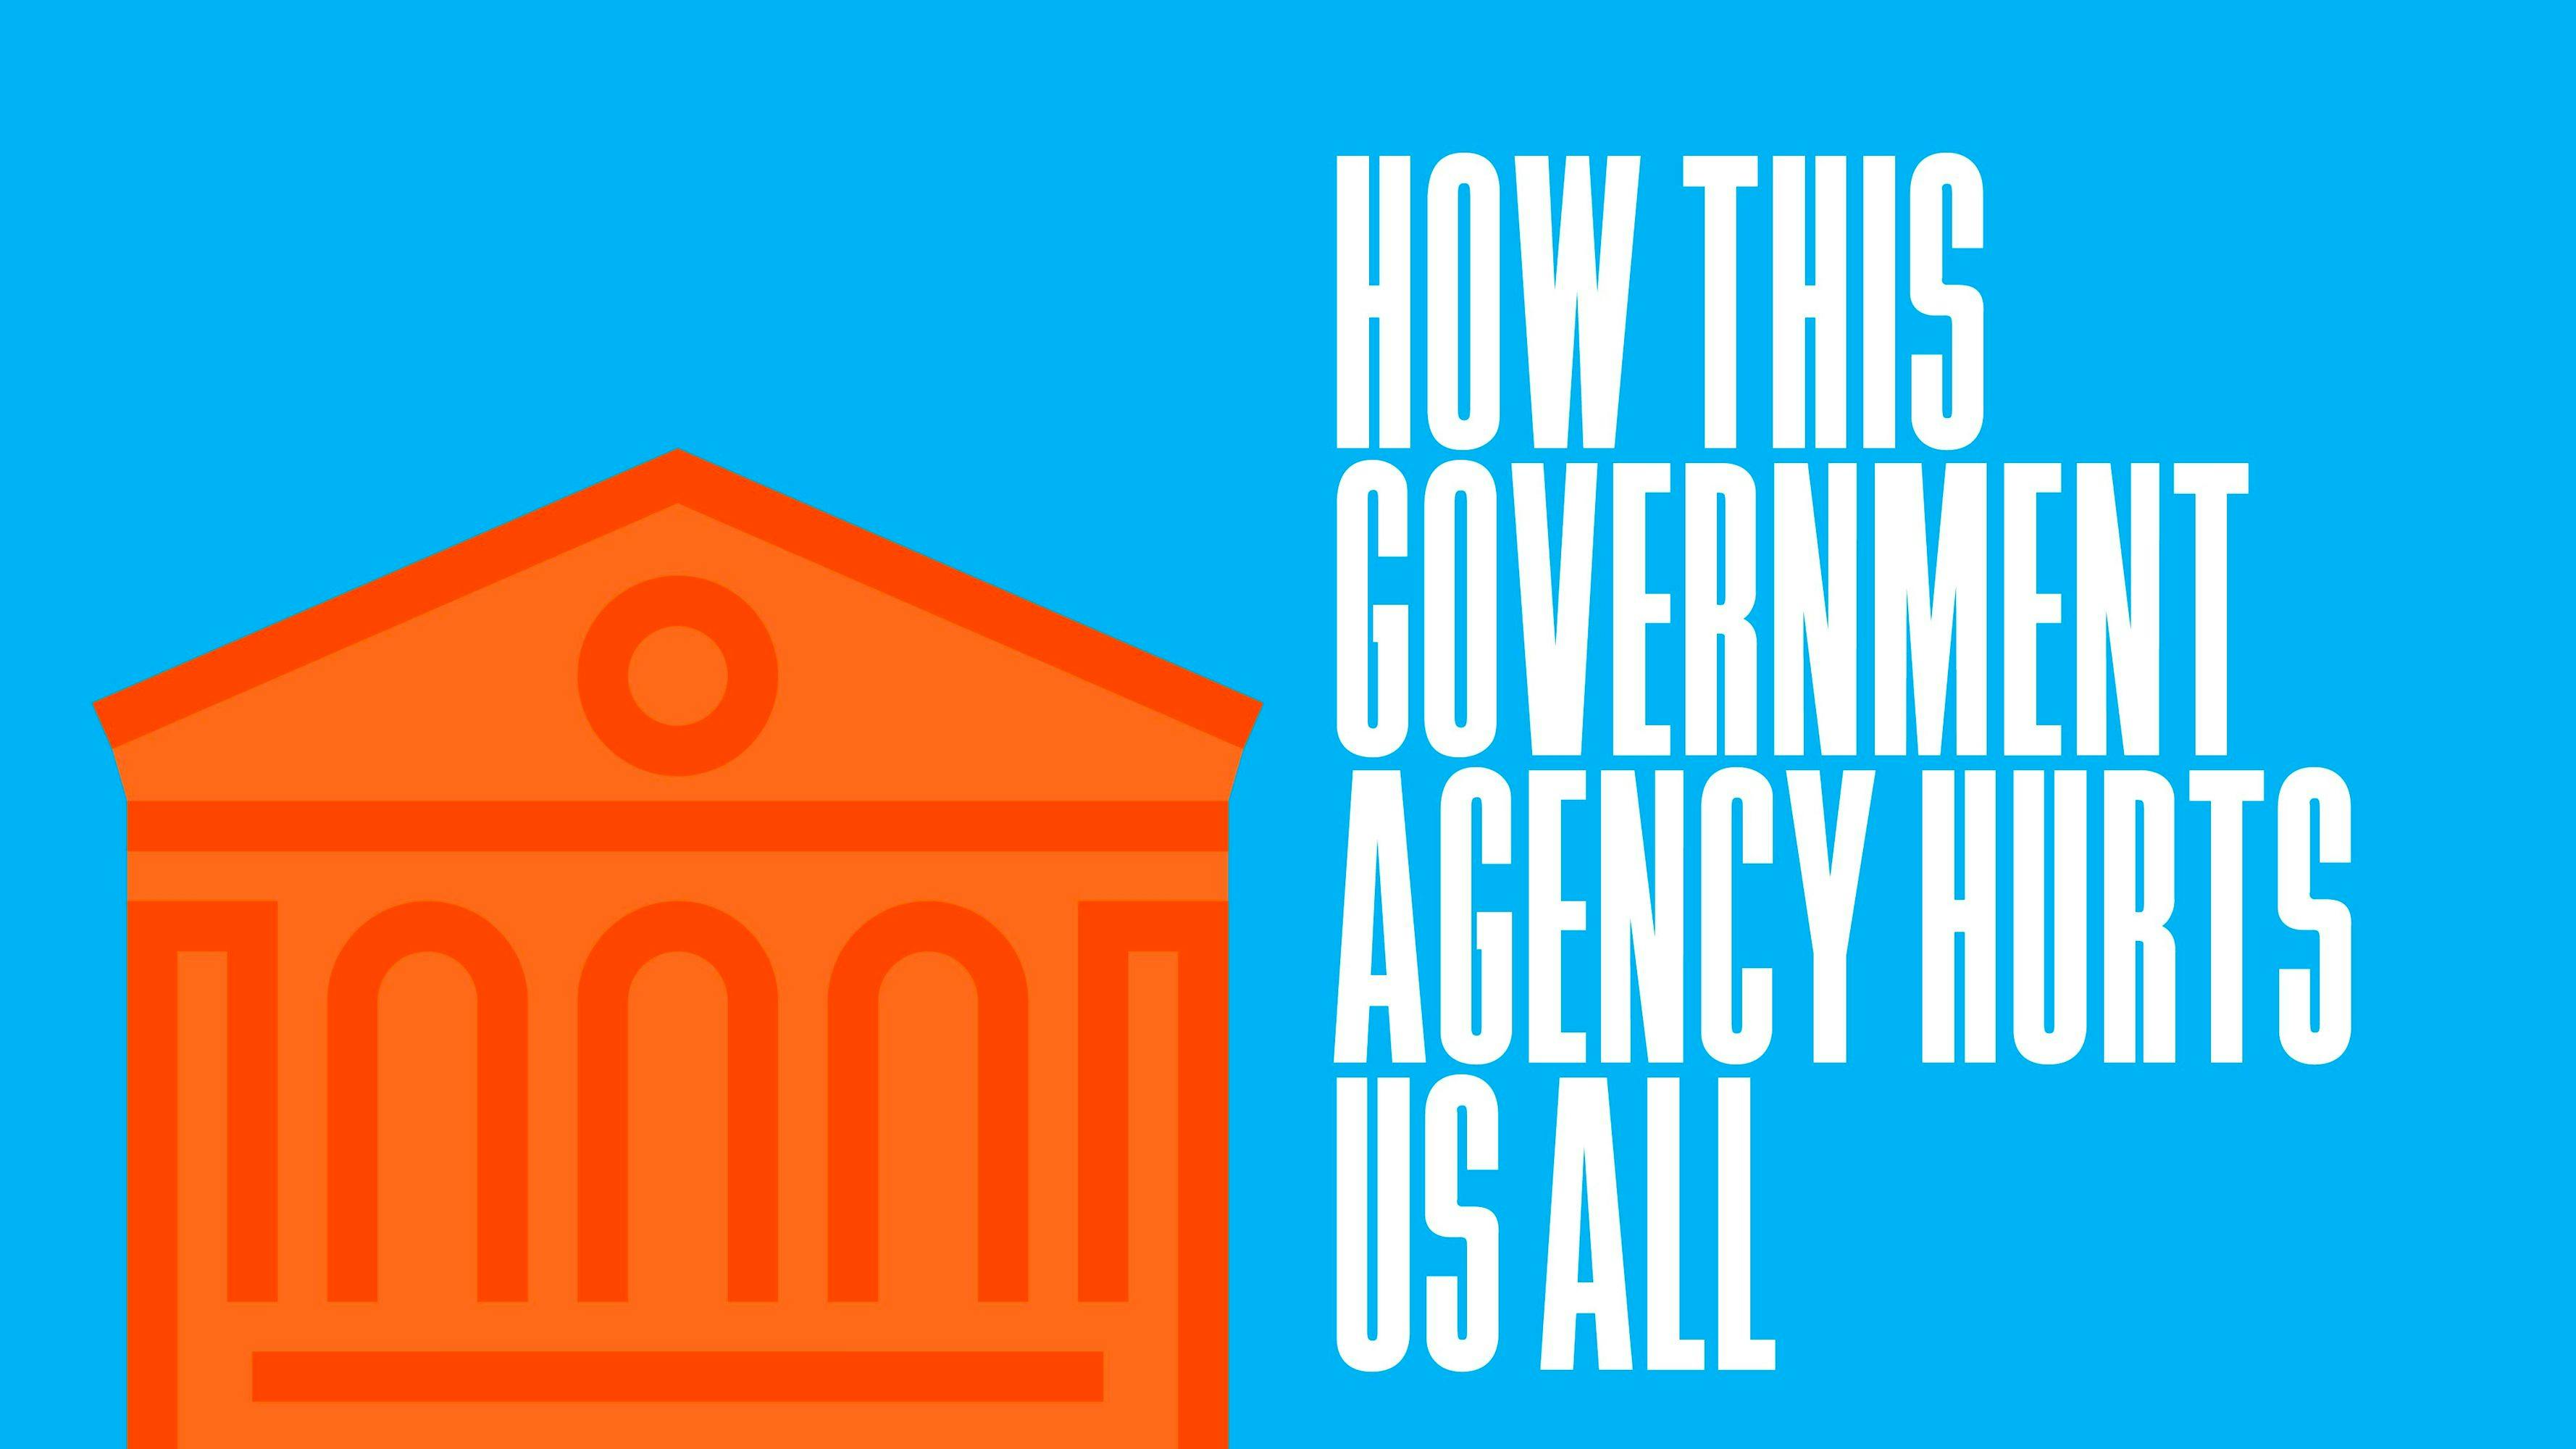 How This Government Agency Hurts Us All